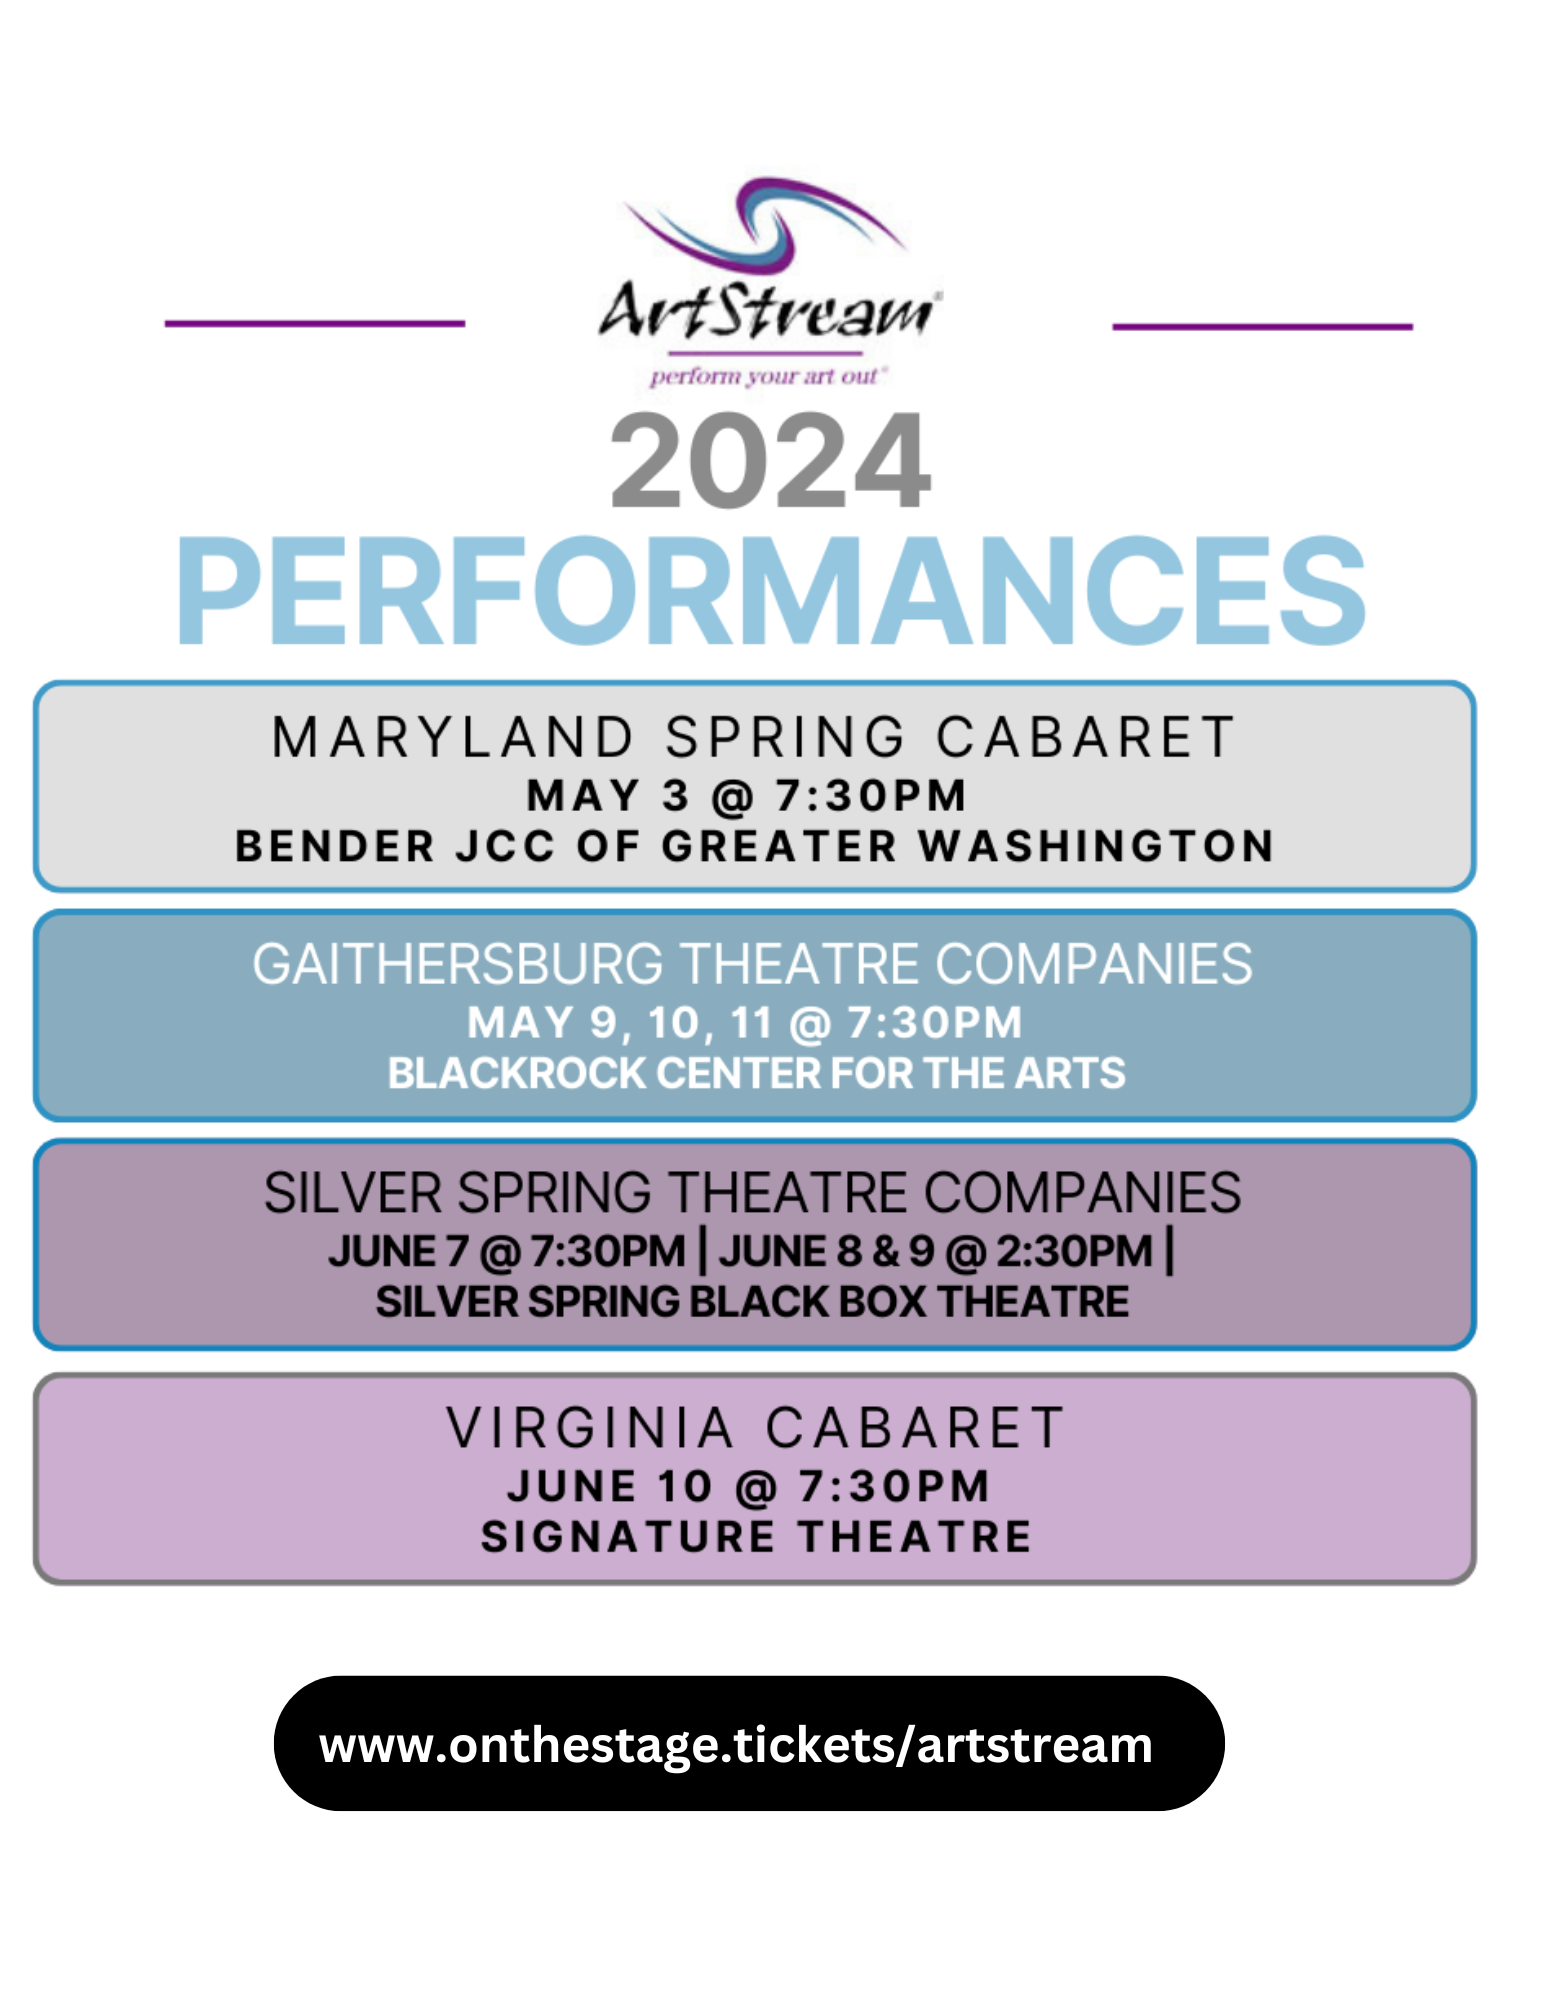 A graphic with the ArtStream logo reads 2020 Performances: MD Spring Cabaret, May 3 2024 @ 7:30pm Bender JCC of Greater Washington. Gaithersburg Theatre Companies May 9-11 2024 @ 7:30, BlackRock Center for the Arts. Silver Spring Theatre Companies June 7 @ 7:30pm, June 8 & 9 @ 2:30pm. Virginia Cabaret June 10 @ 7:30pm Signature Theatre. https://www.onthestage.tickets/artstream